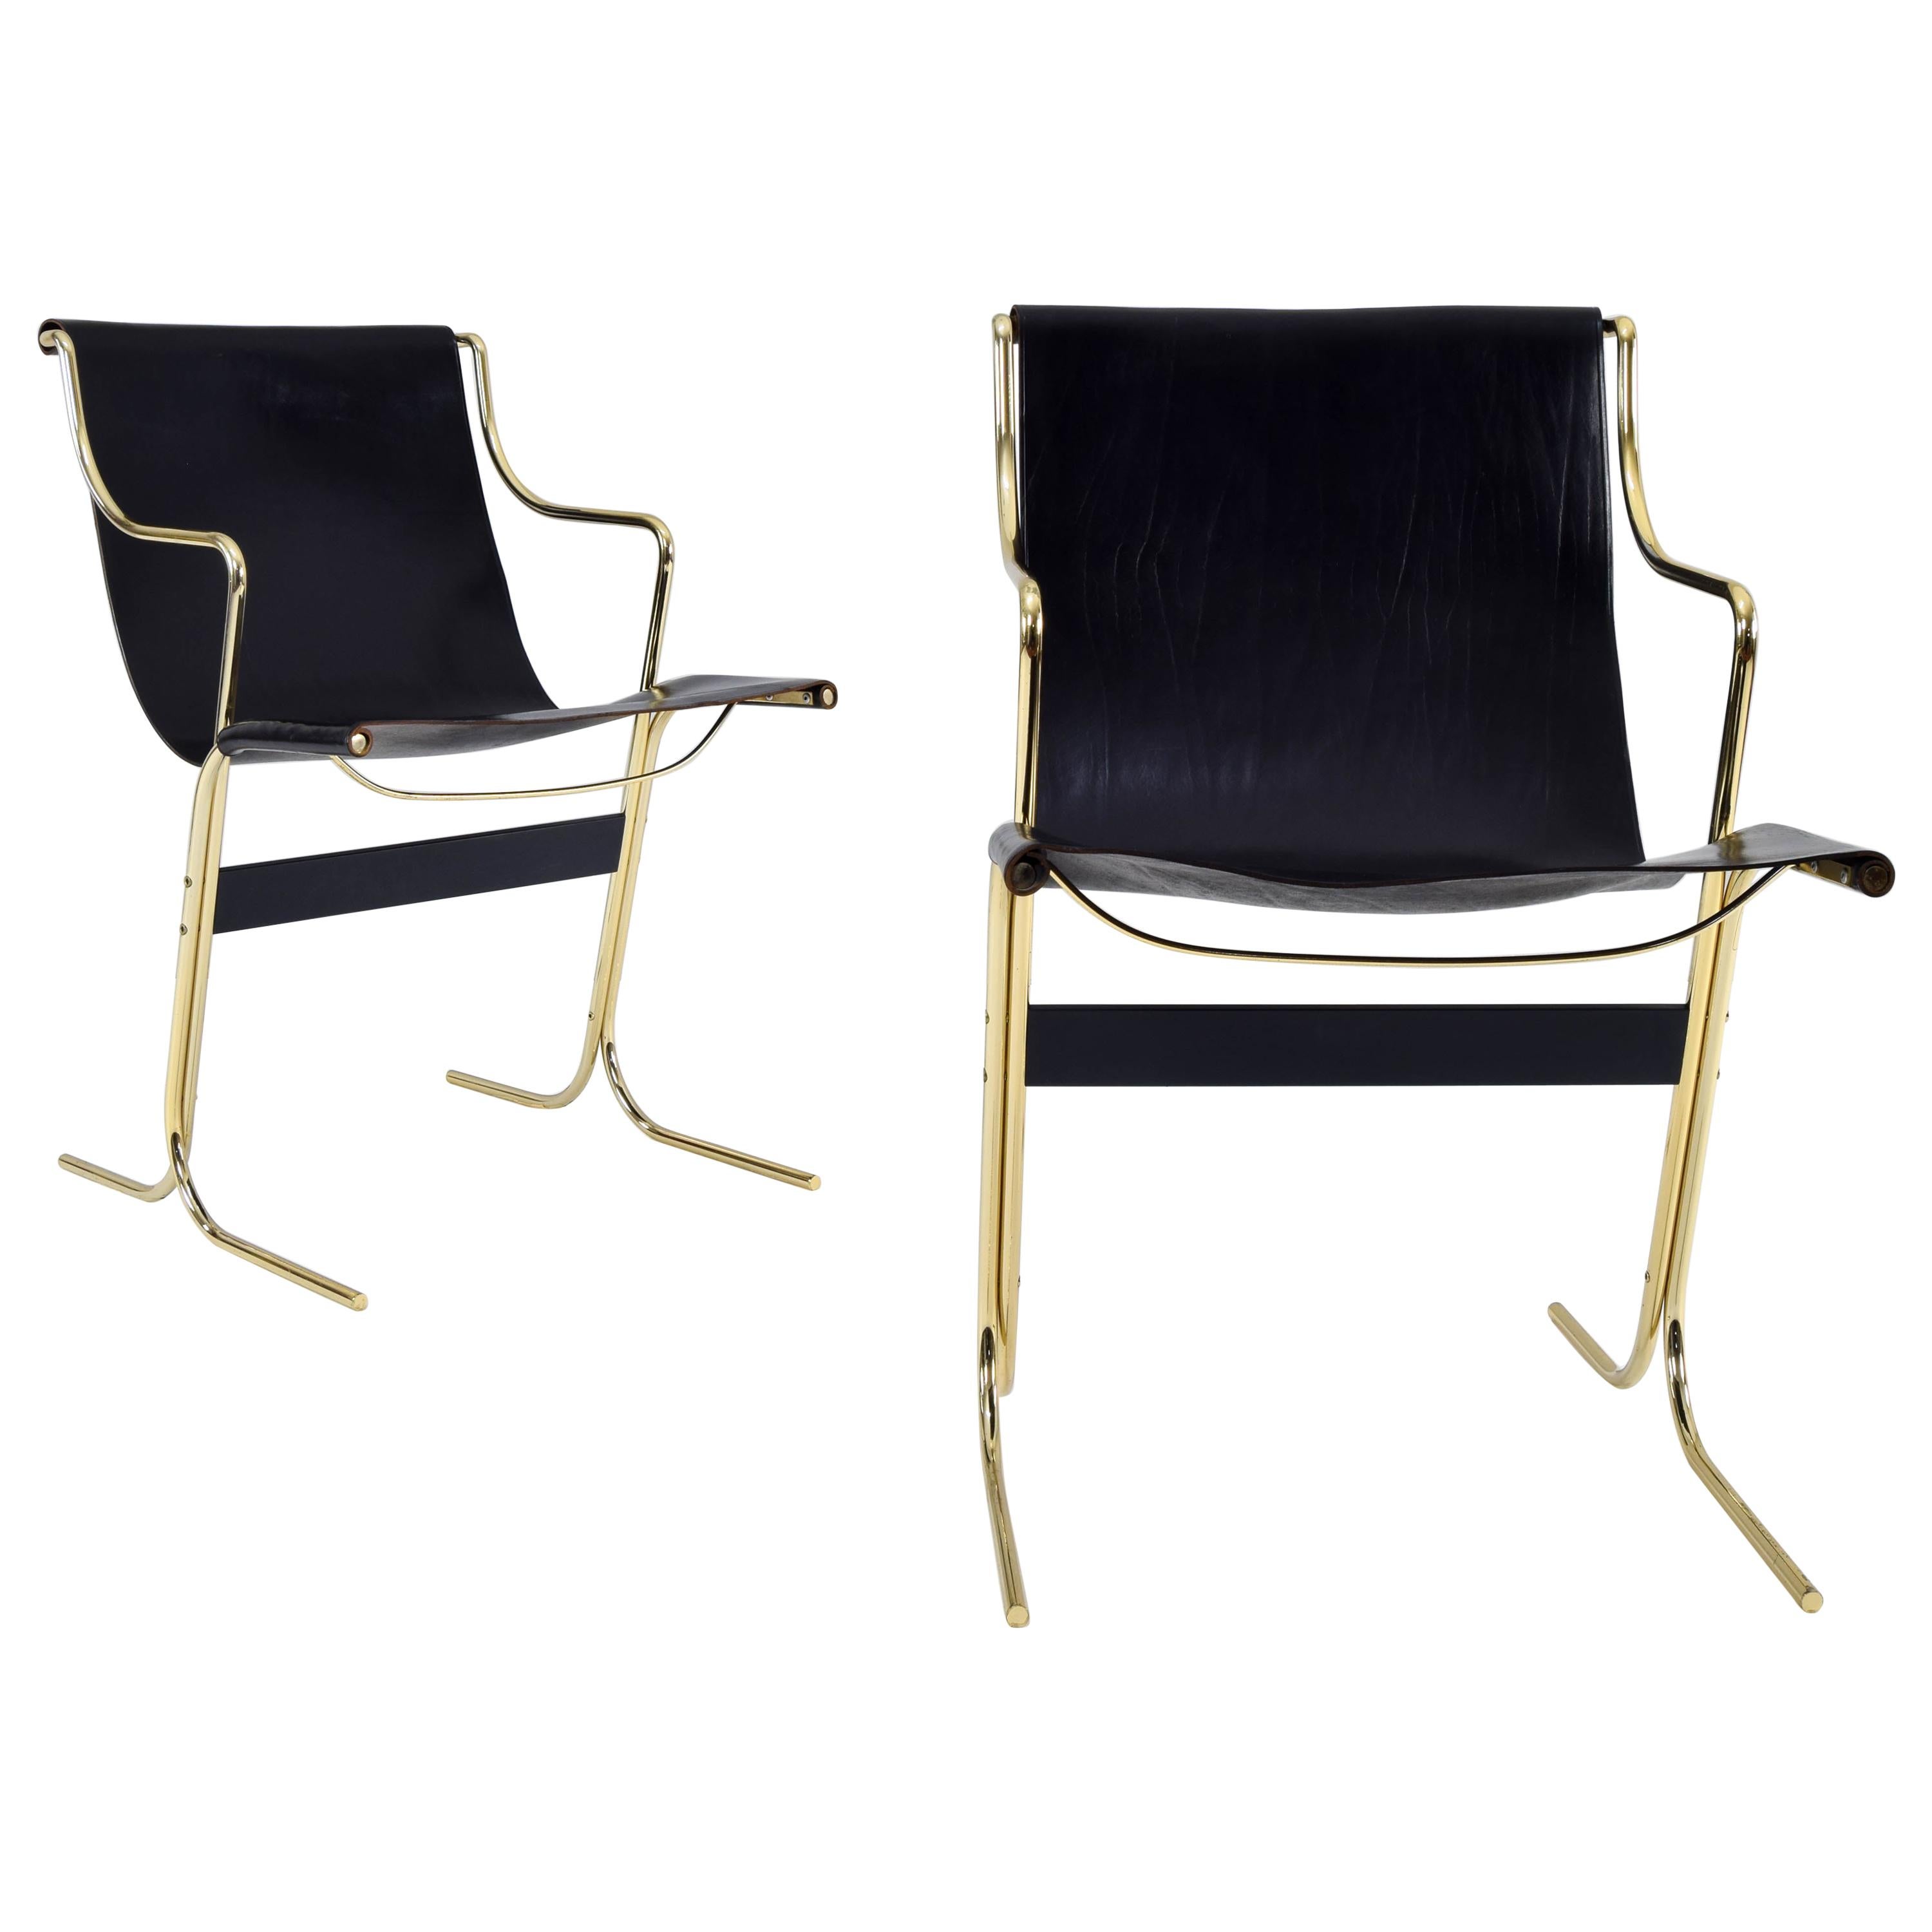 Pair of Leather and Brass Cigno Chairs by Ross Littell and Kelly to Padova Italy